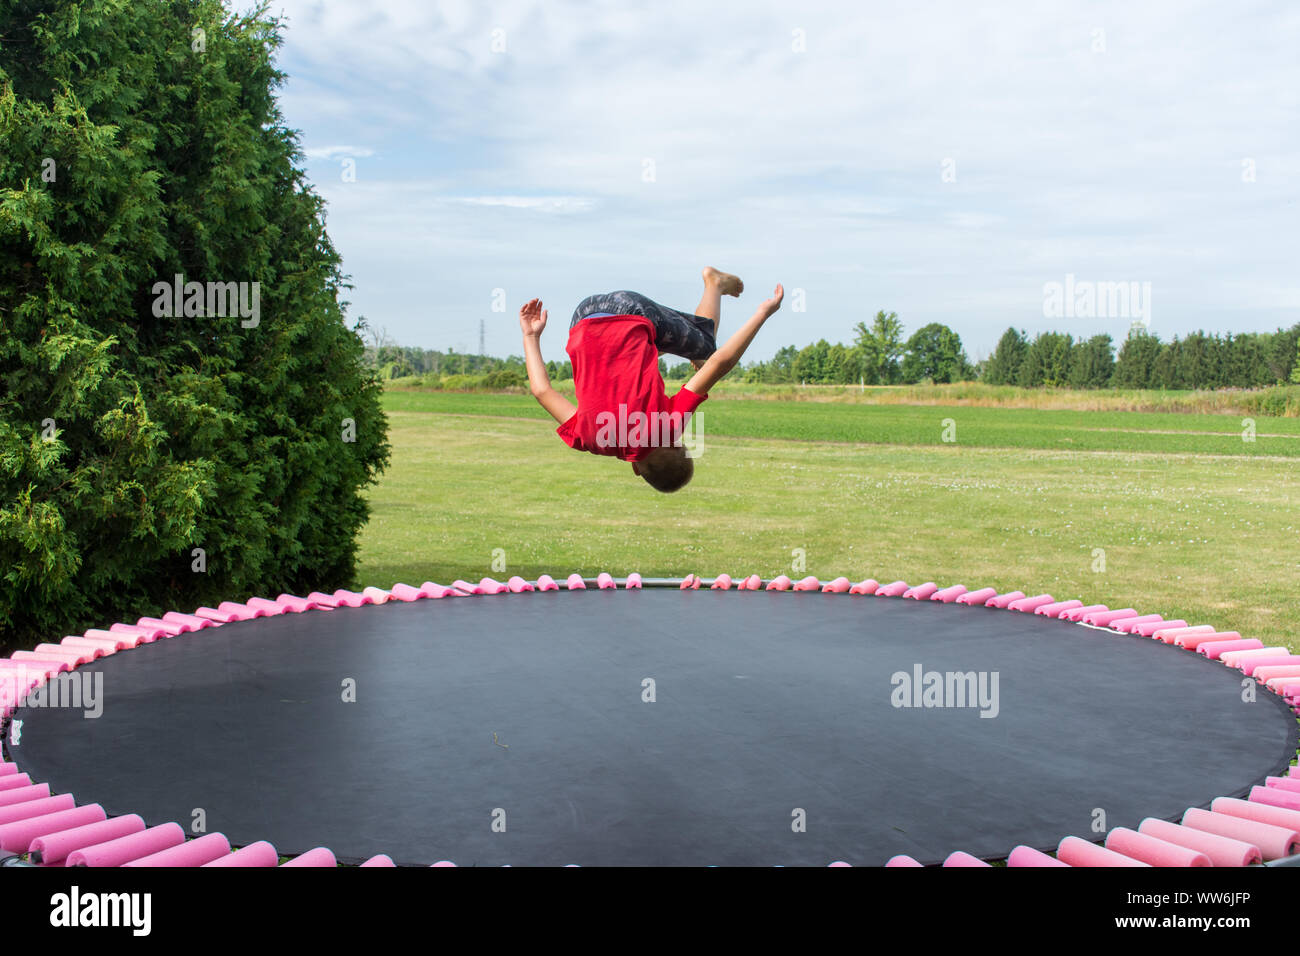 Young boy in a red shirt outdoors flips over in a somersault doing a  gymnastics move on a trampoline. Concept Stock Photo - Alamy